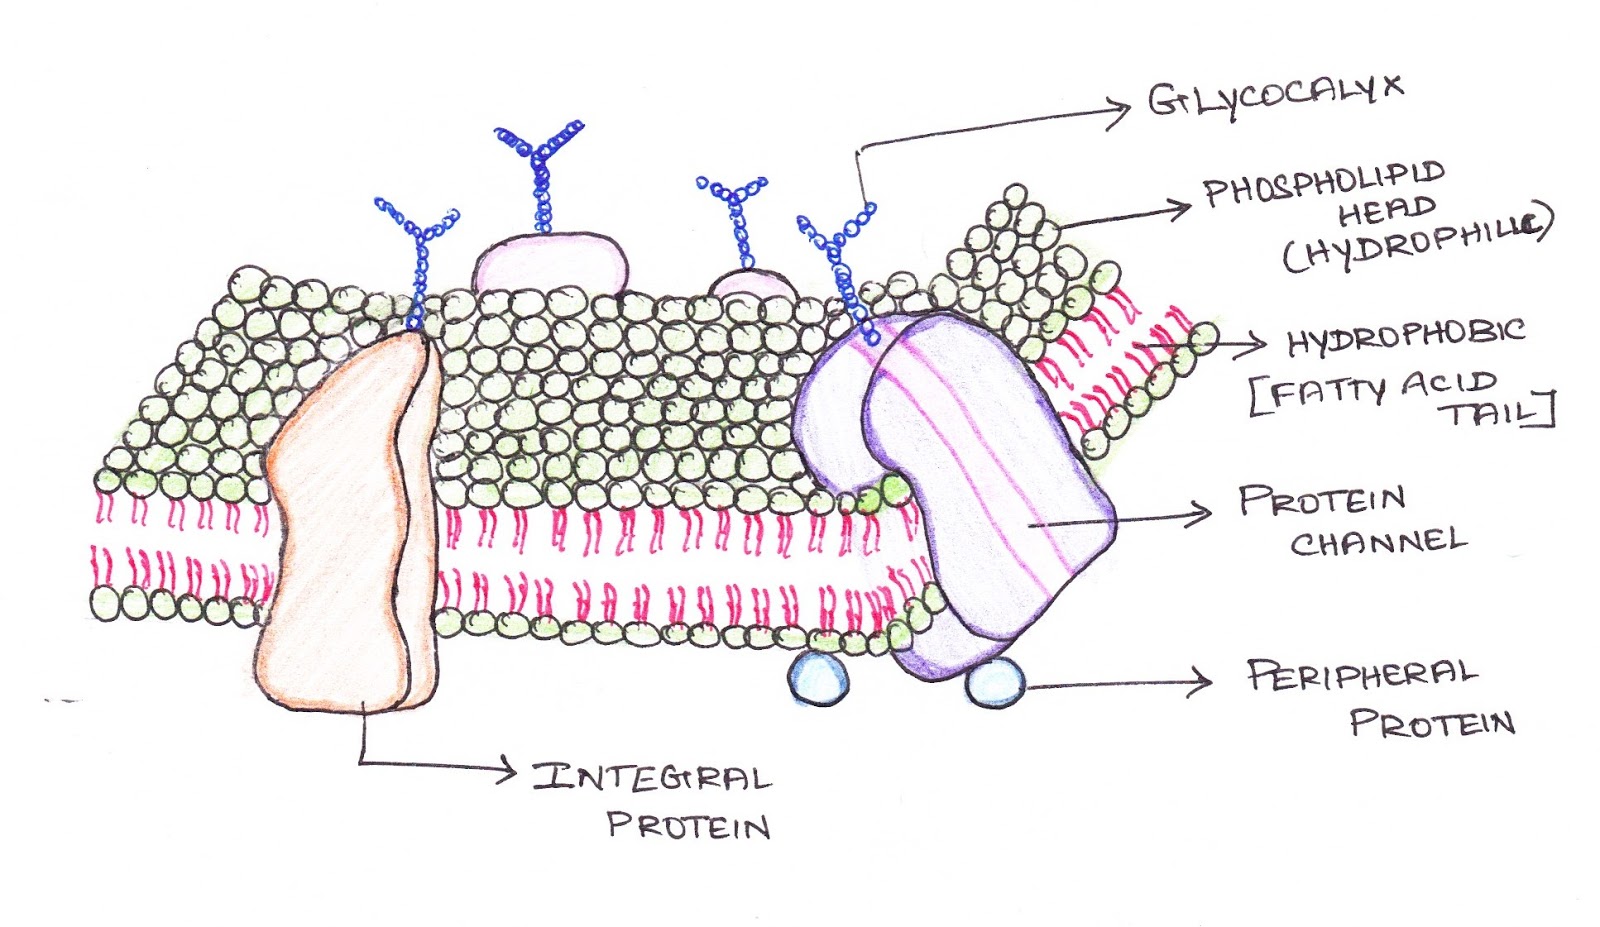 cell membrane structure download